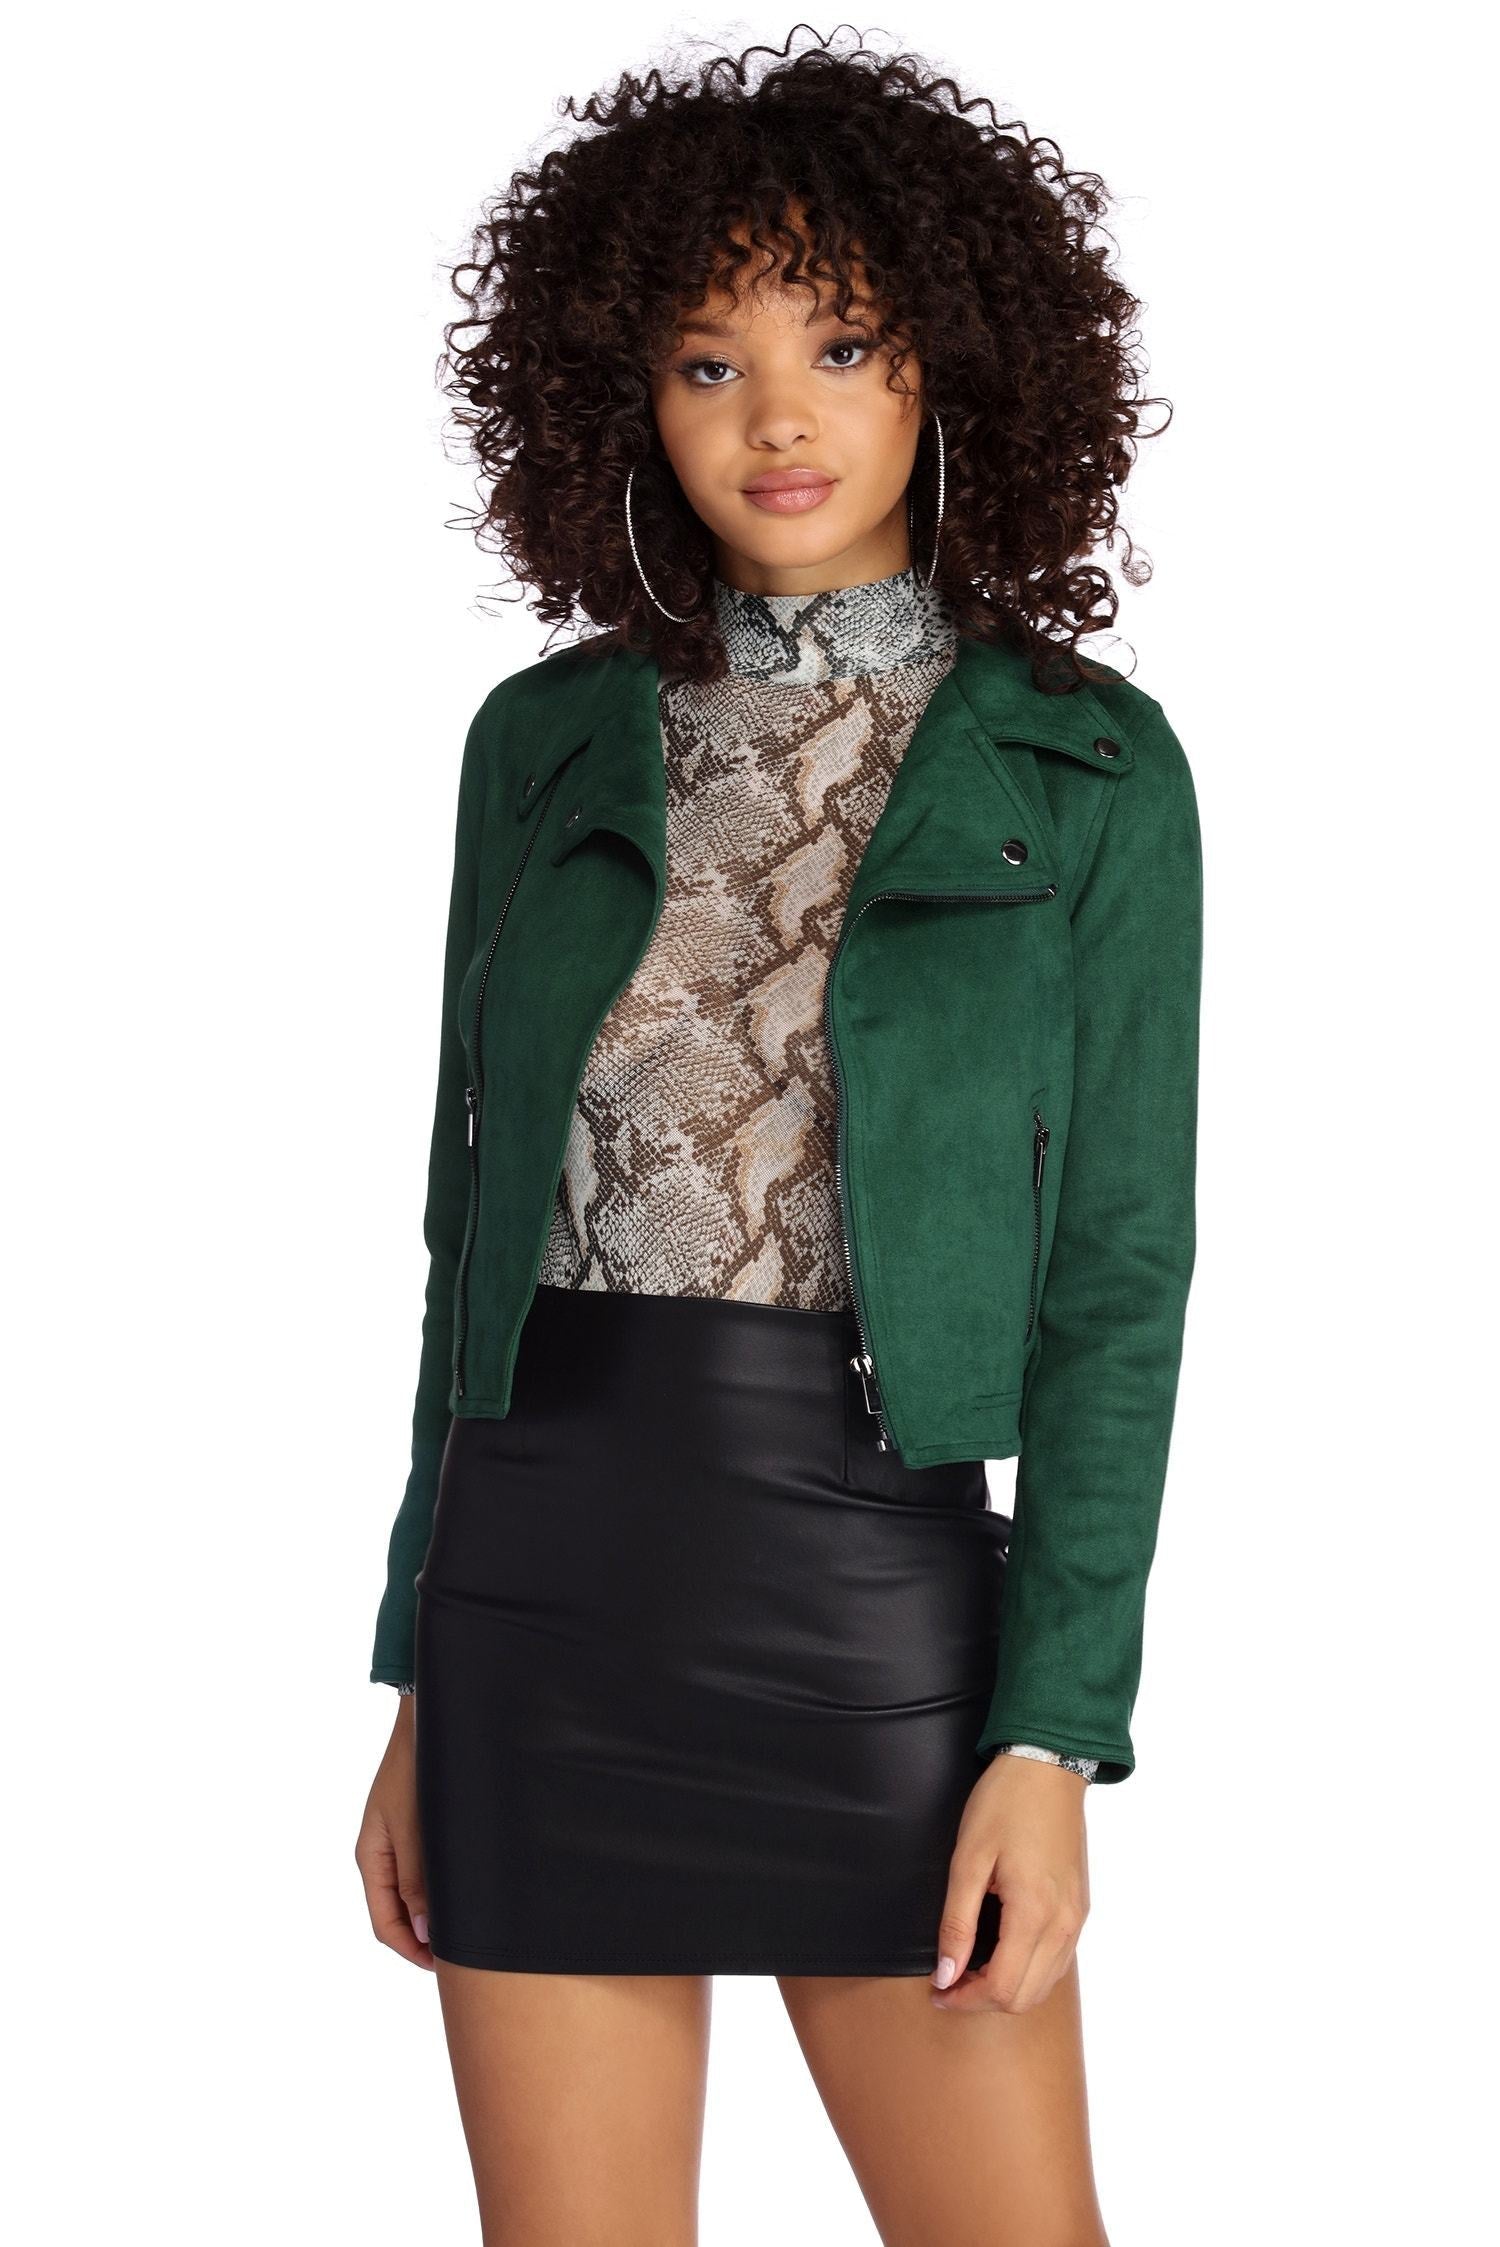 Making Moves Moto Jacket - Lady Occasions